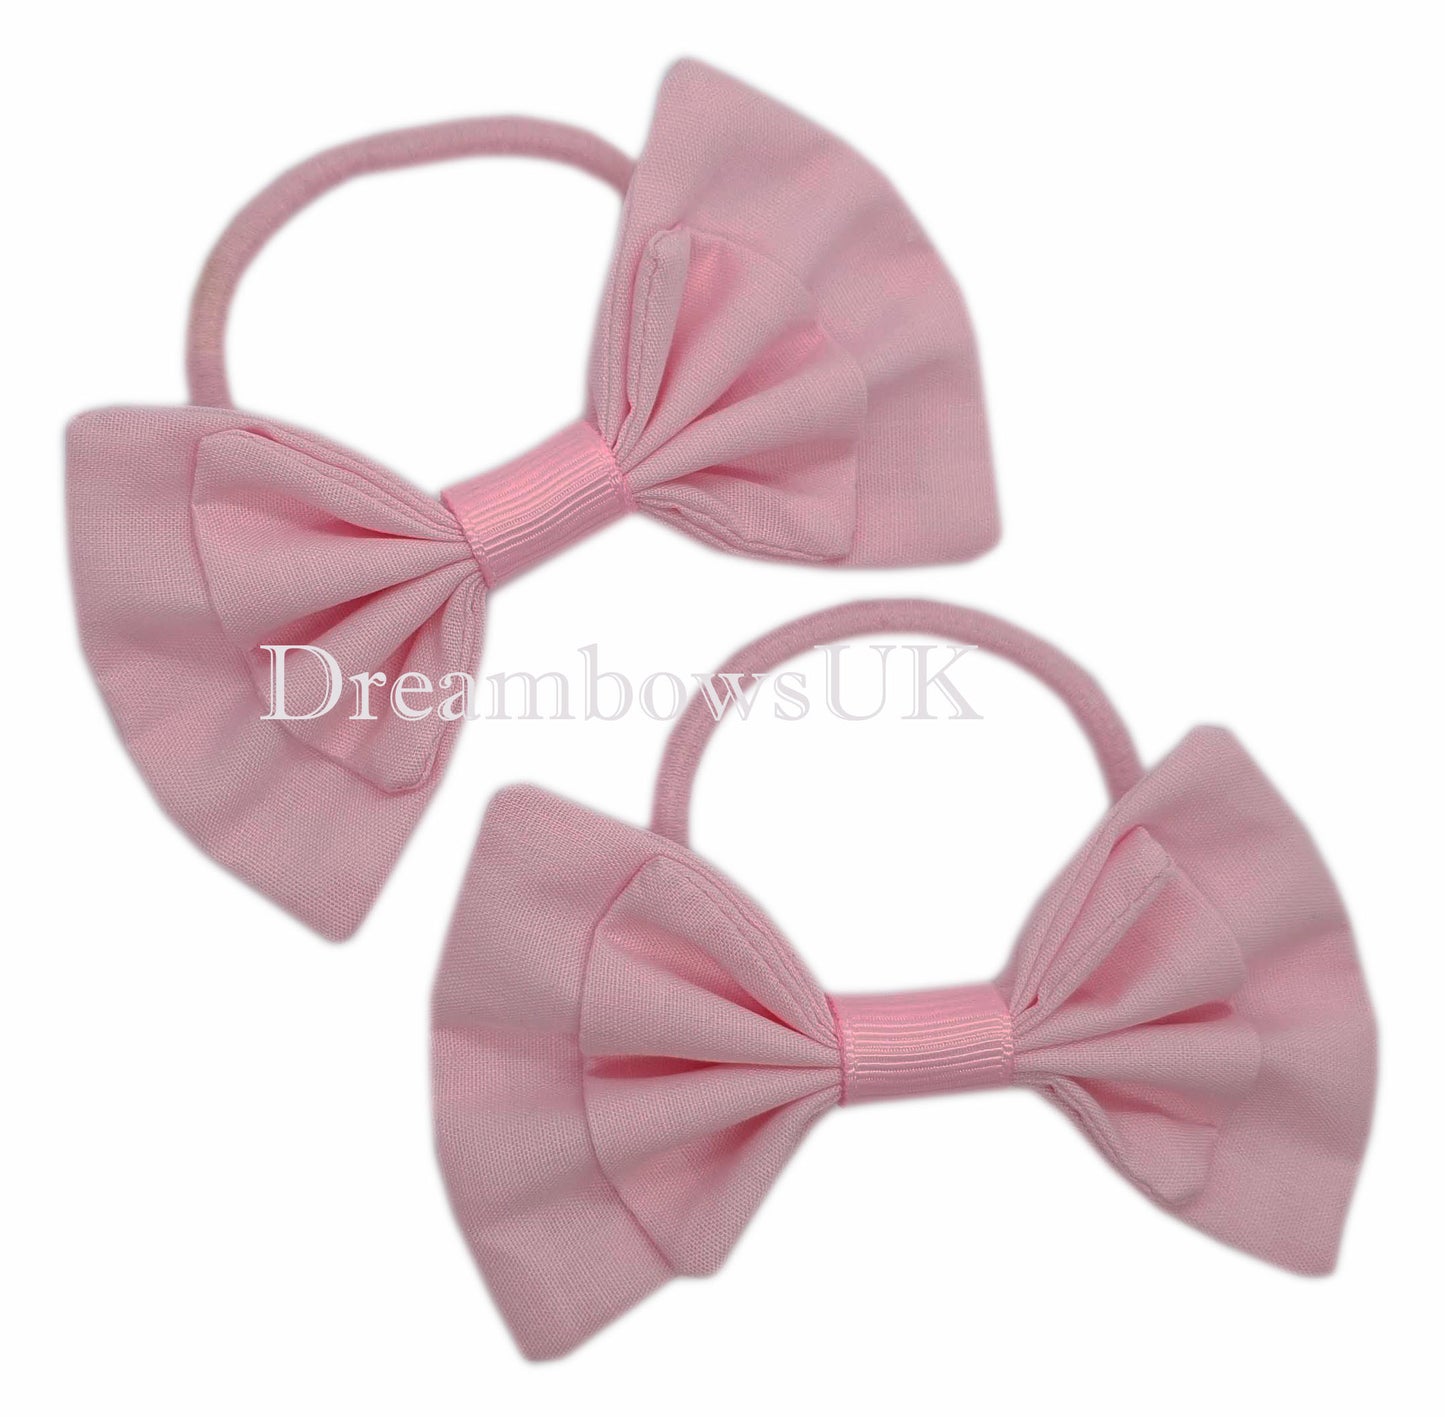 Girls baby pink fabric hair bows on thick hair ties